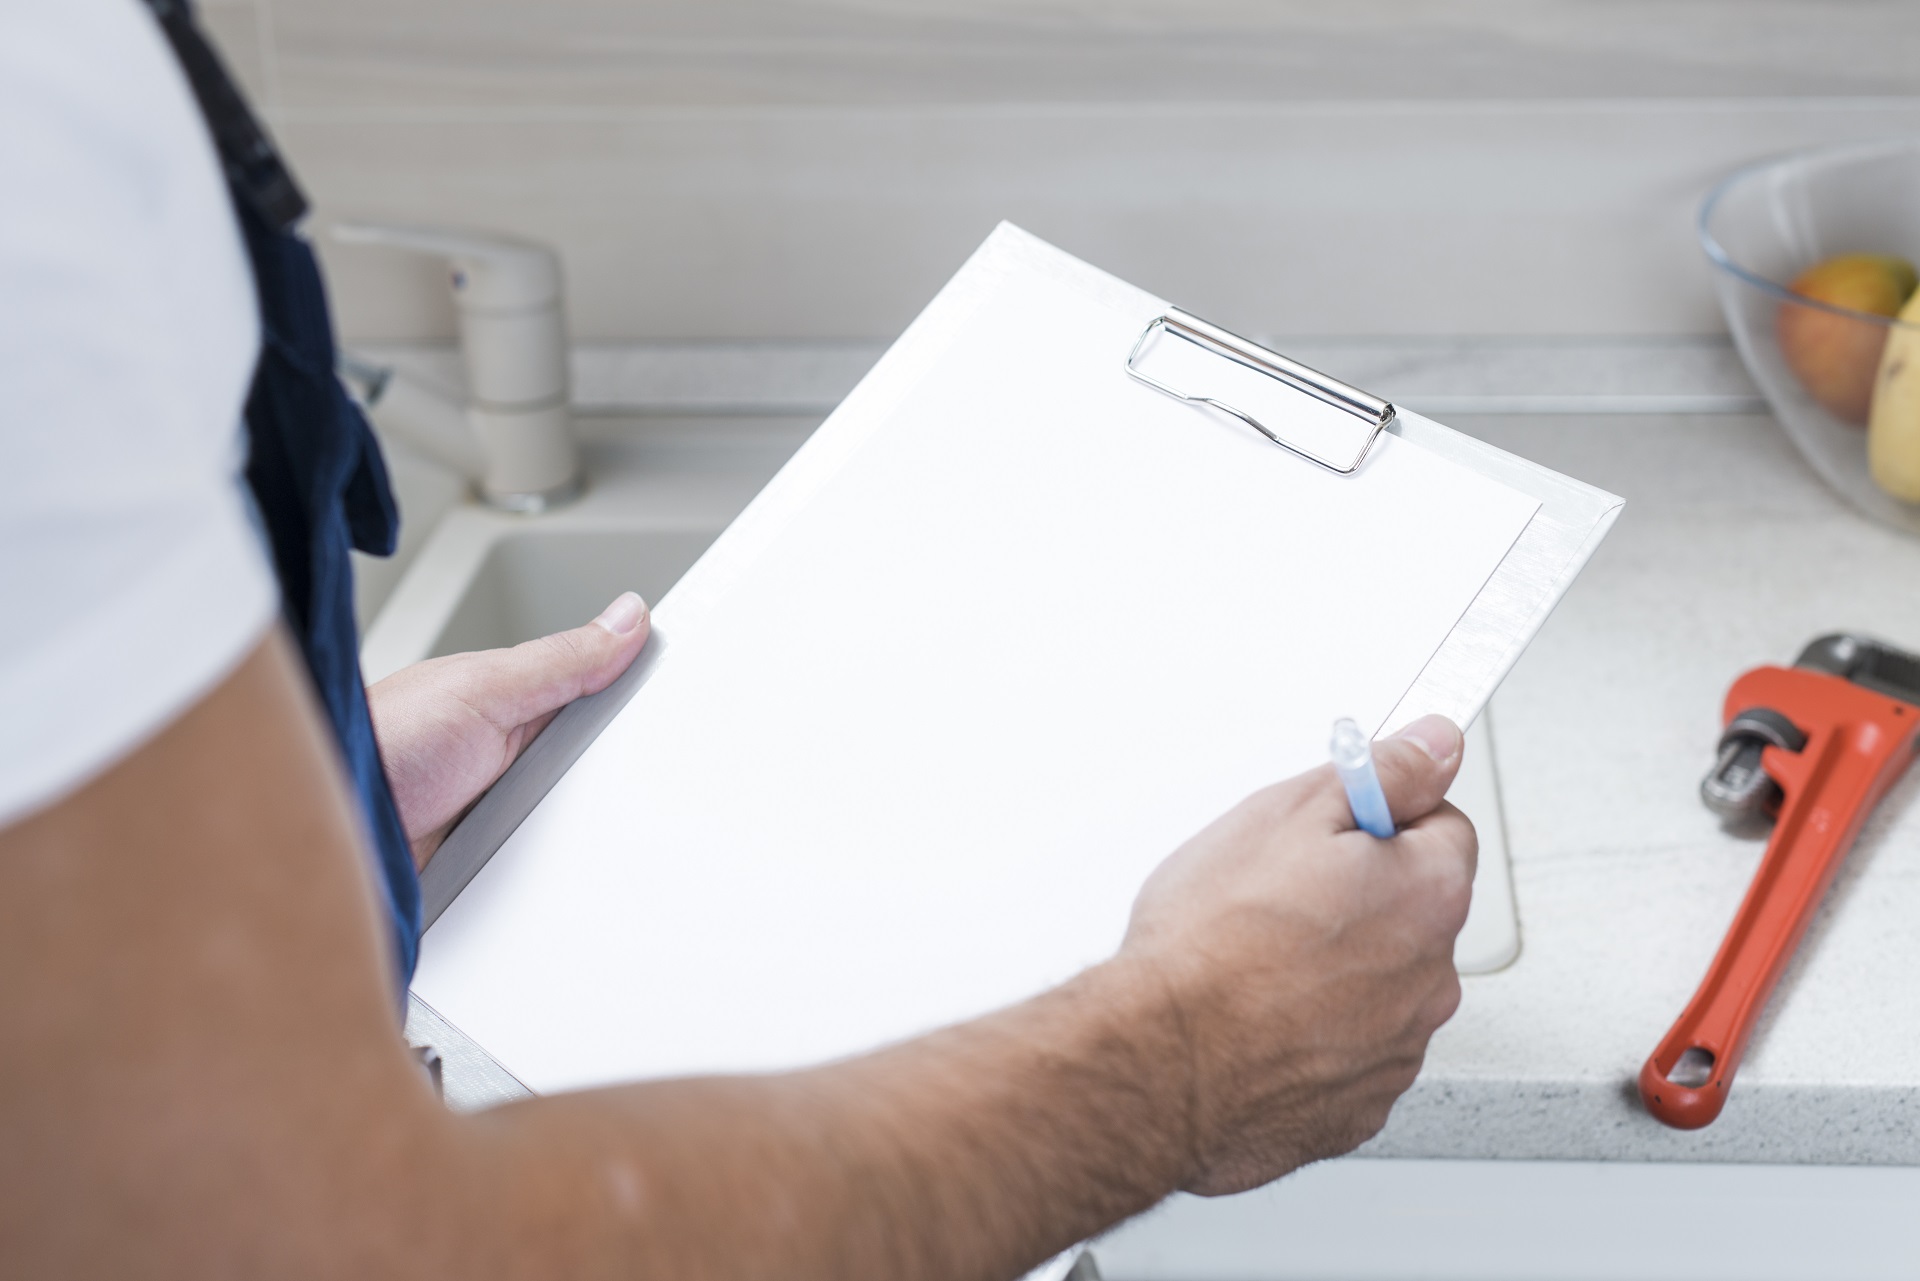 Plumber holding clipboard making list of plumbing issues